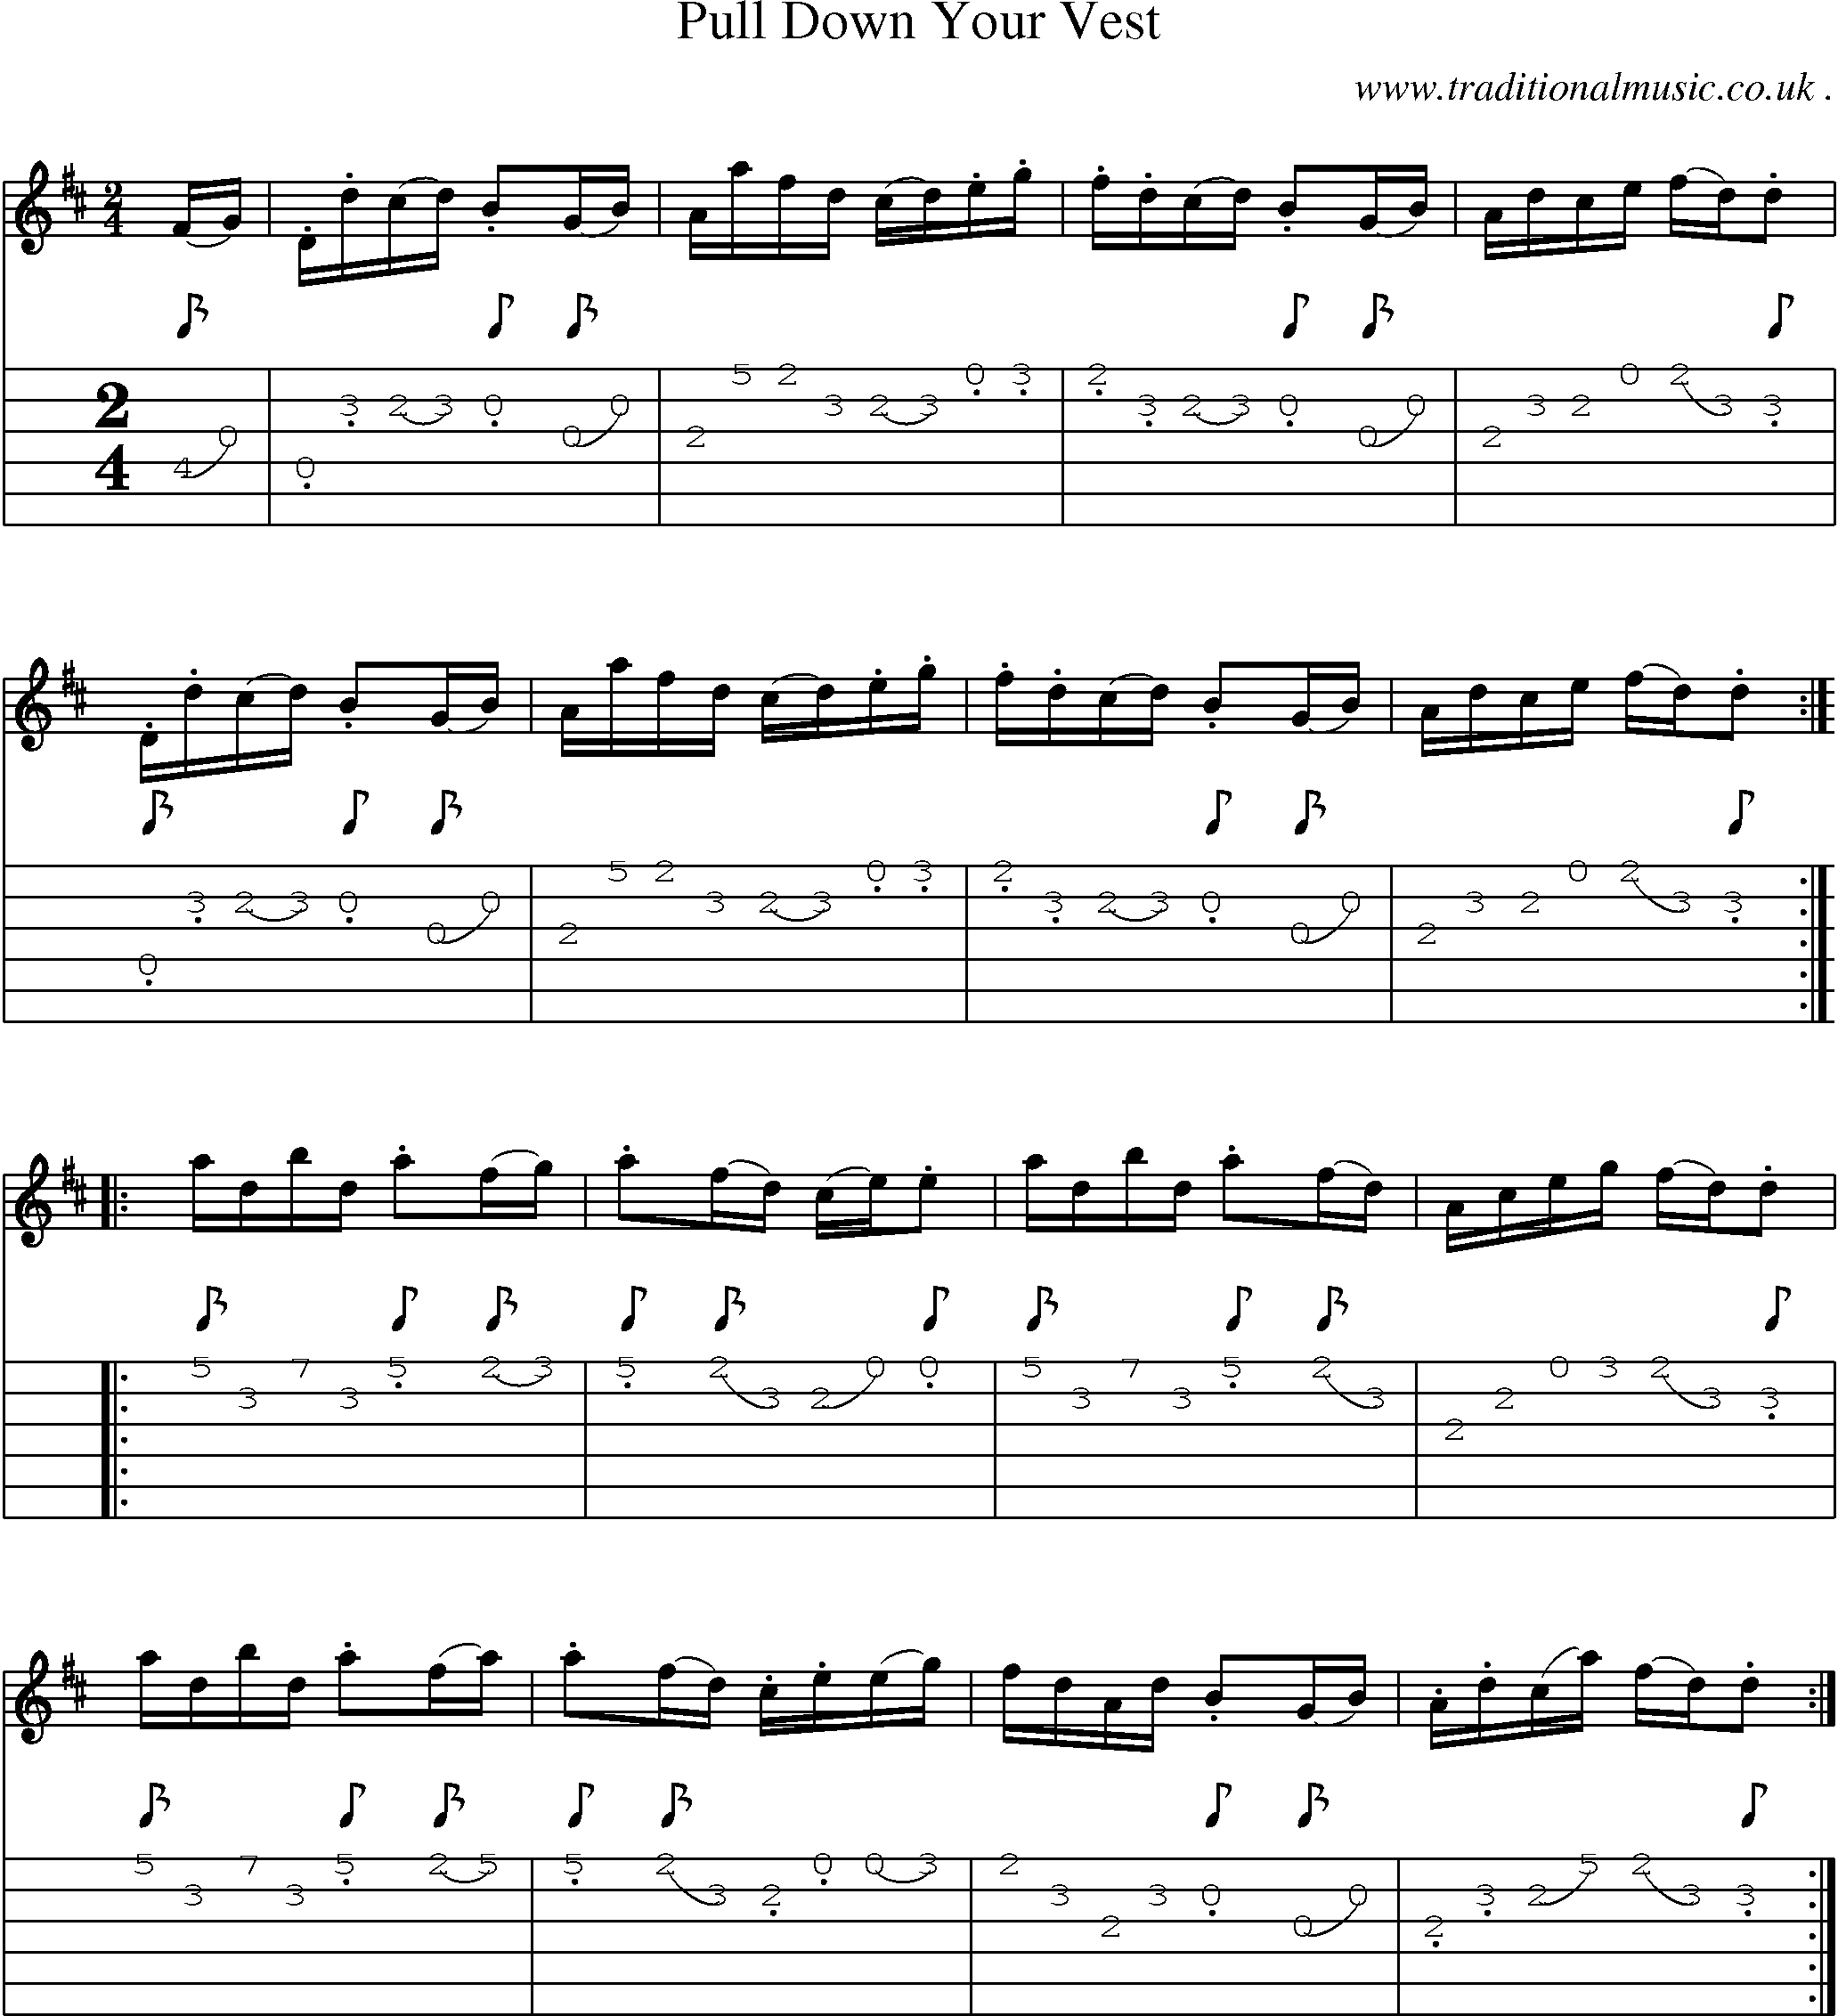 Sheet-Music and Guitar Tabs for Pull Down Your Vest